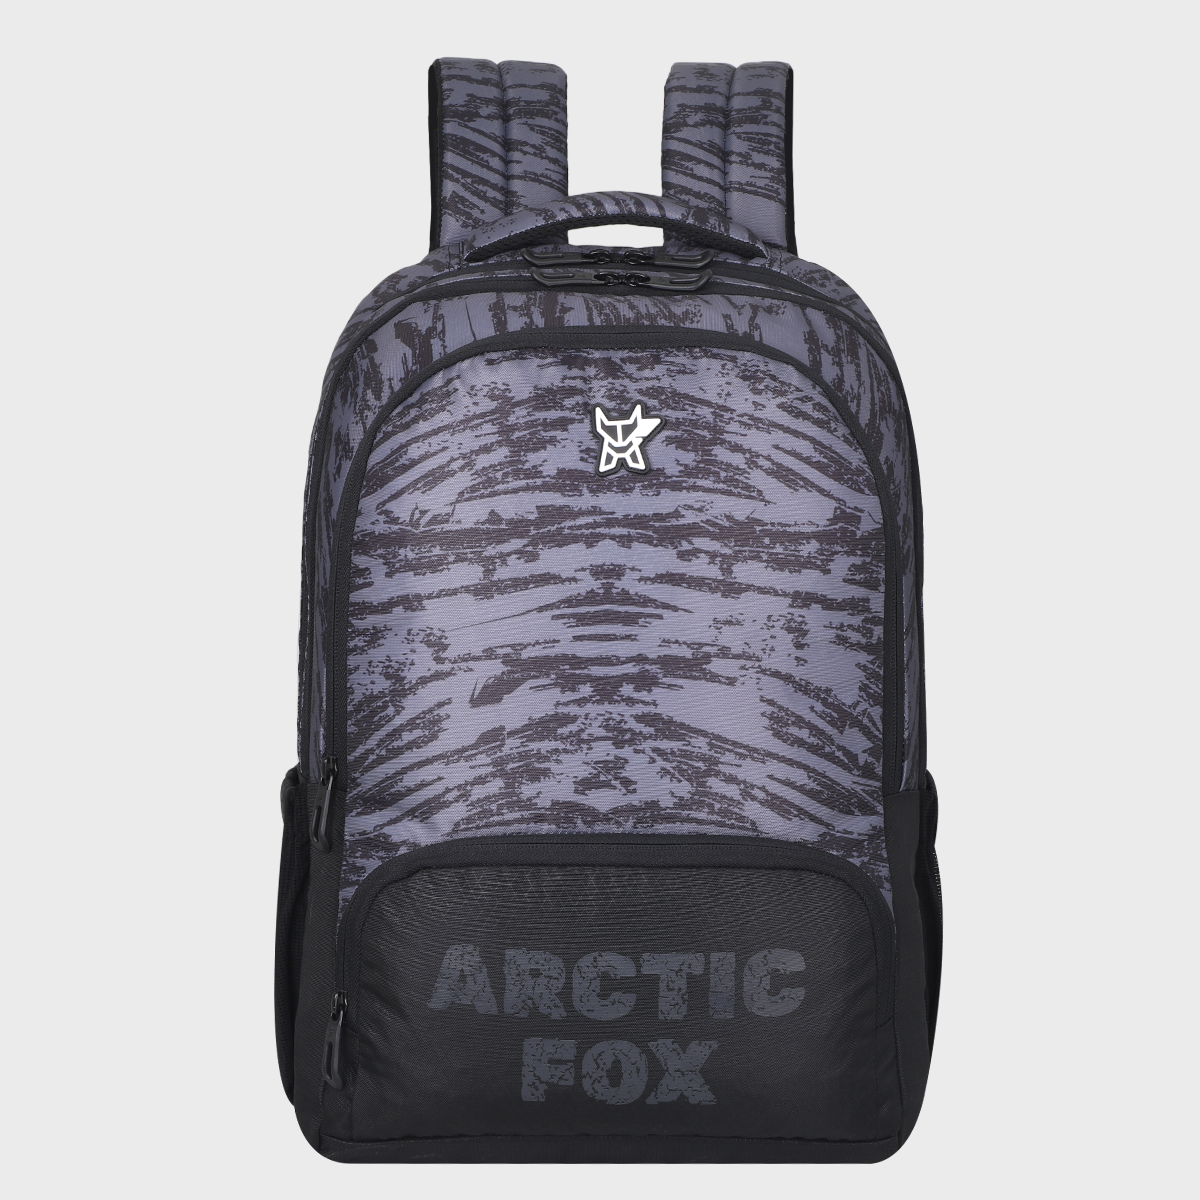 Bring Style and Security to Your Travels with Arctic Fox's Anti-Theft